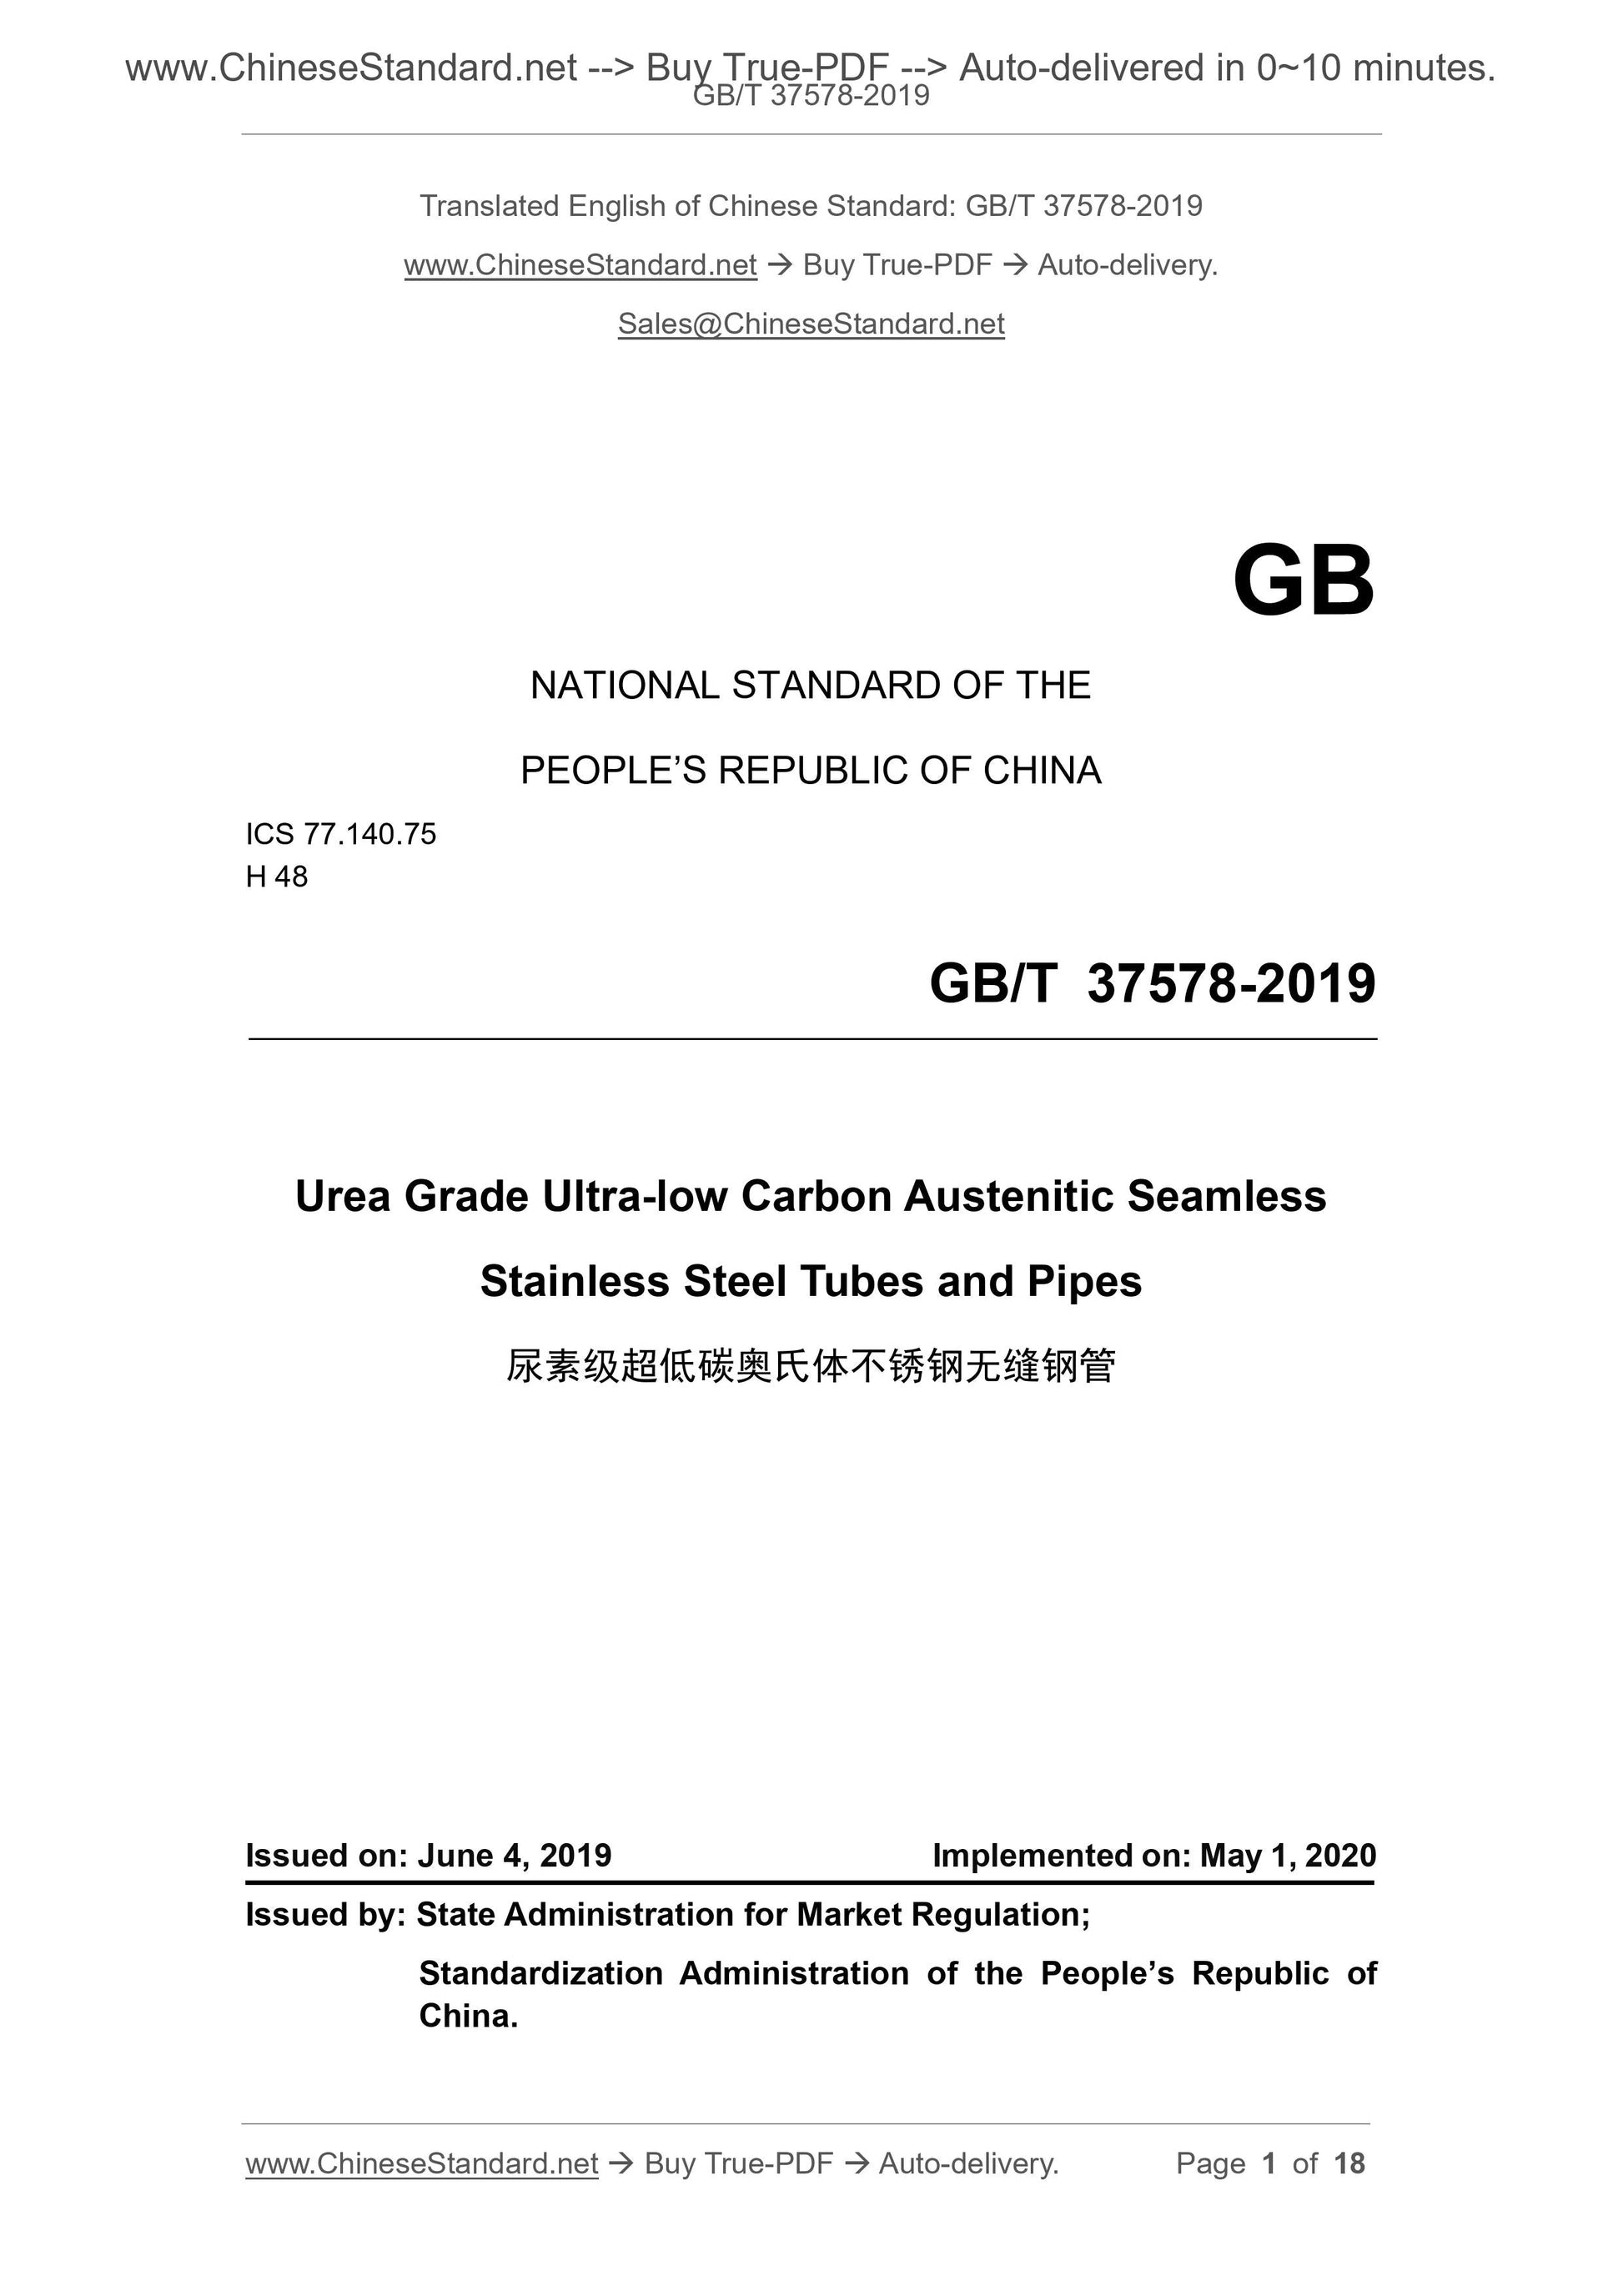 GB/T 37578-2019 Page 1